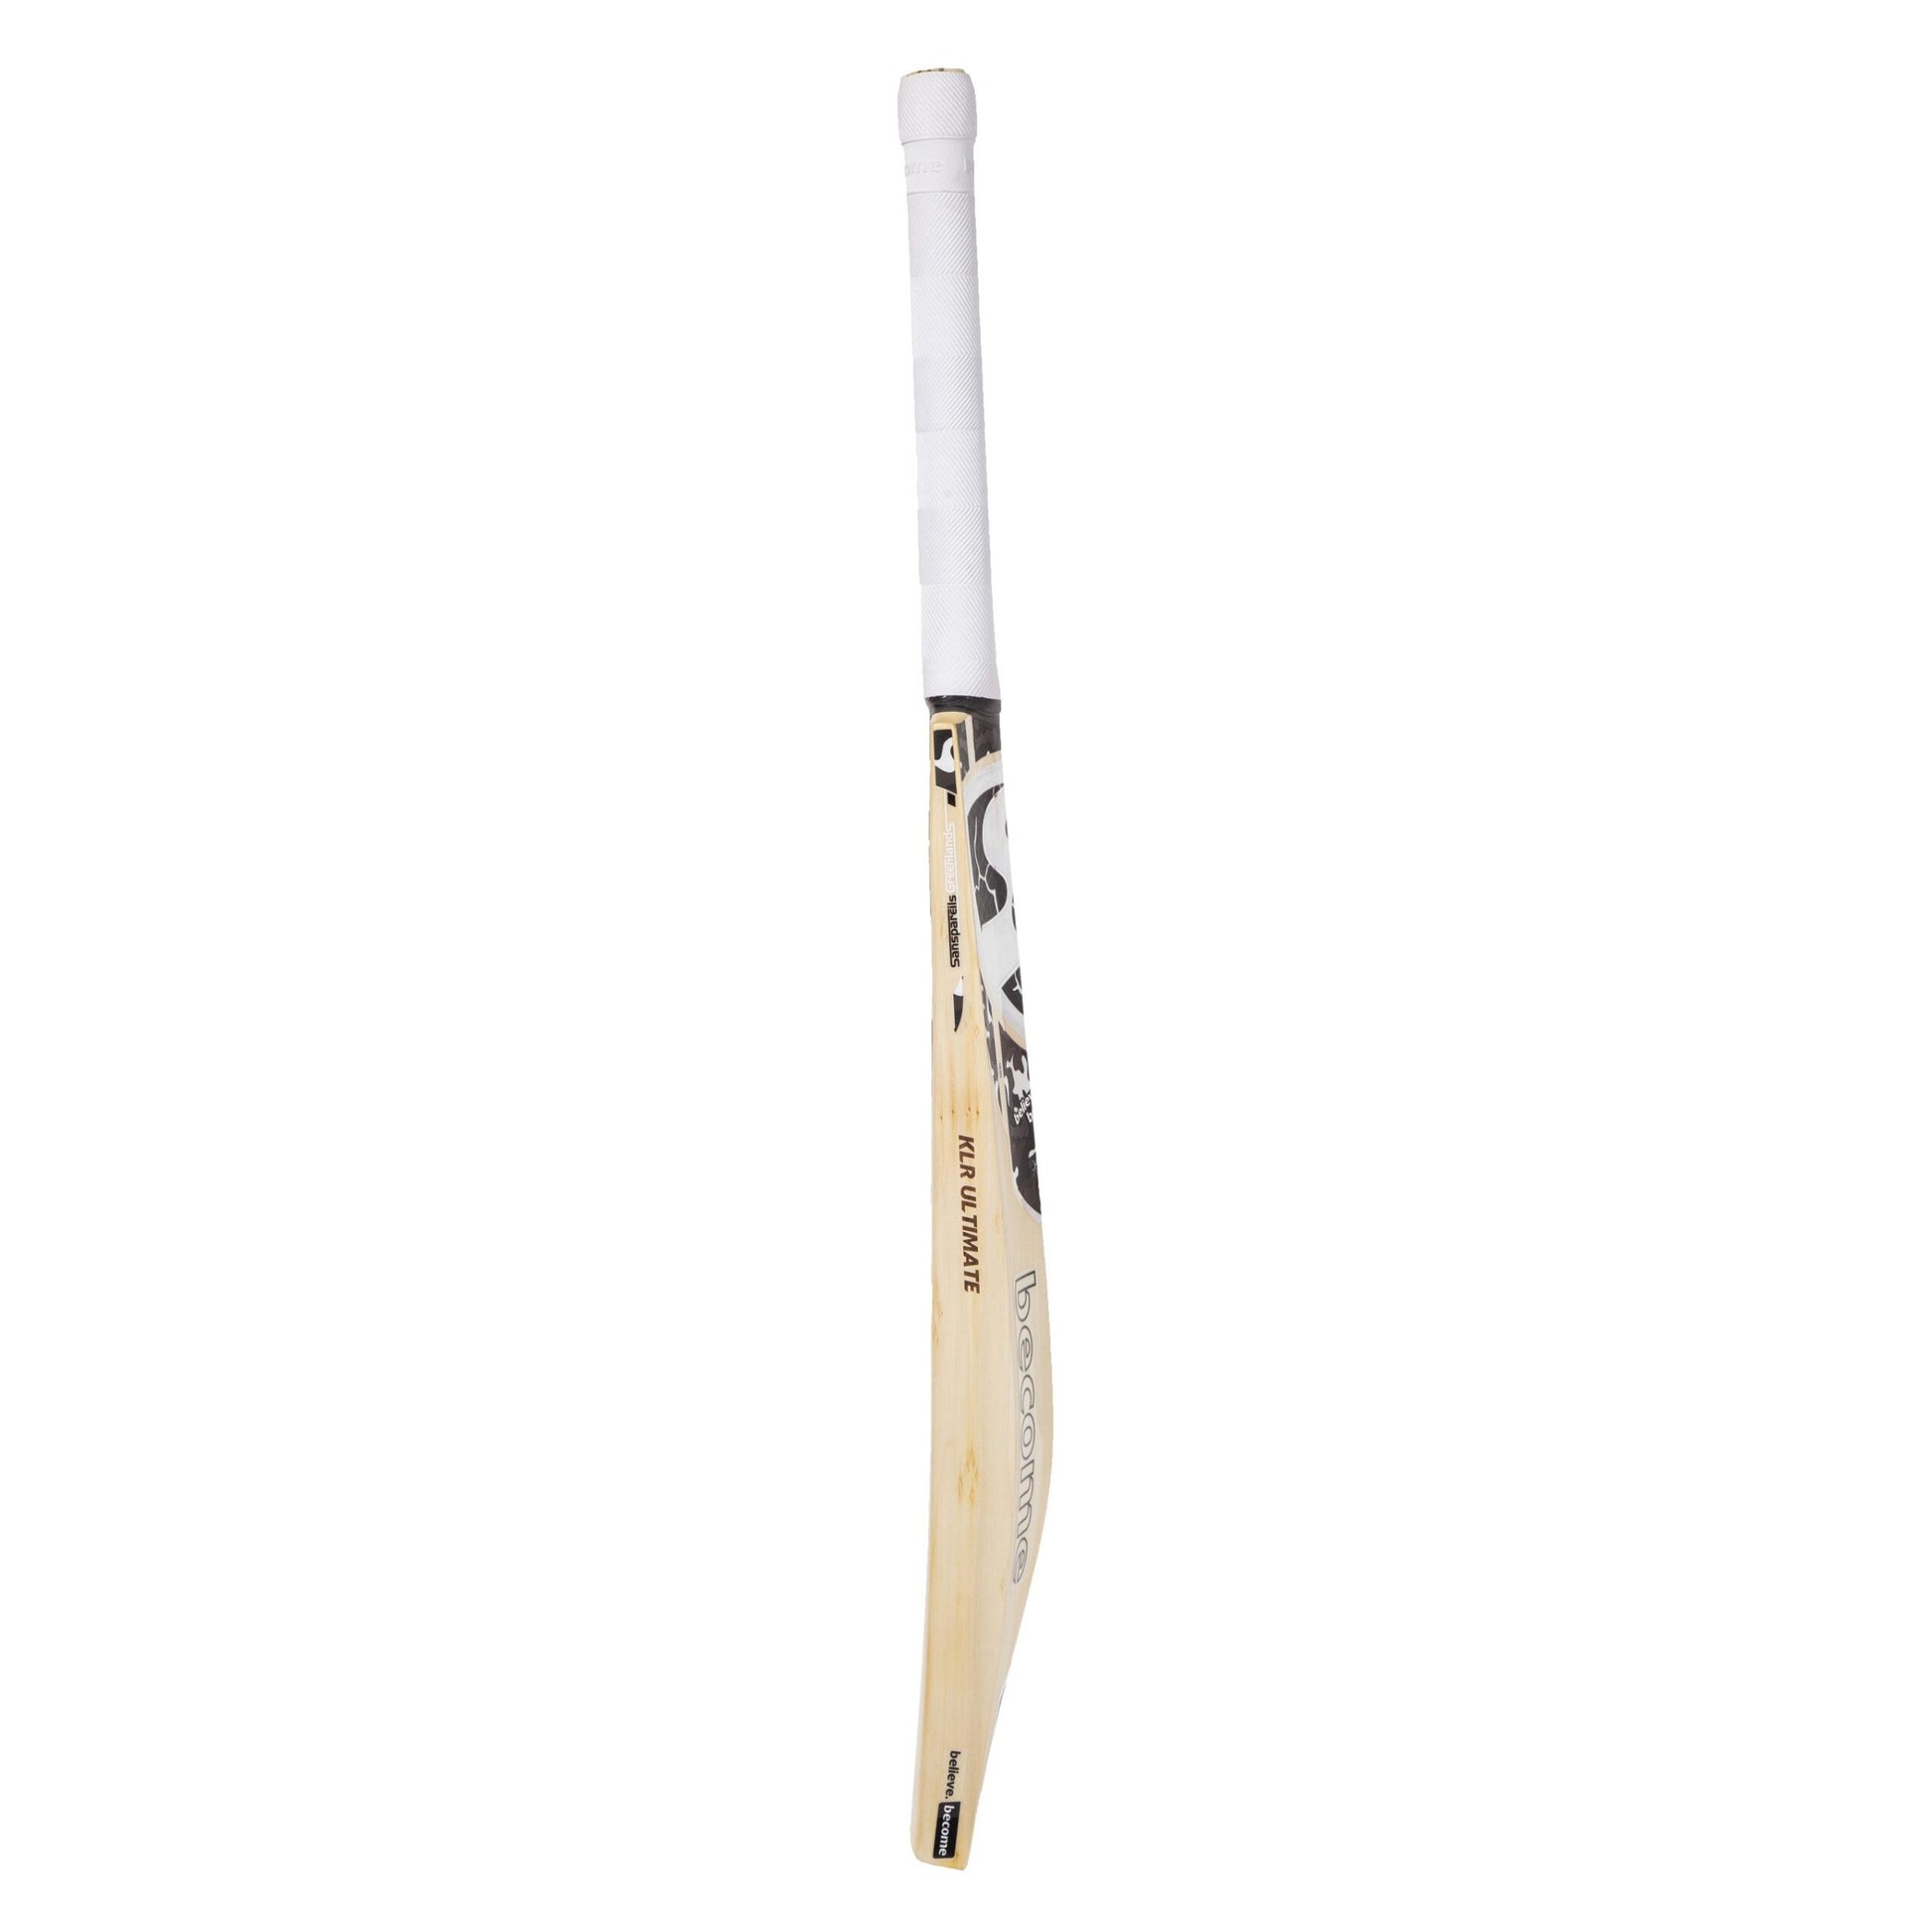 SG KLR Ultimate Finest English Willow grade 3 Cricket Bat (Leather Ball)